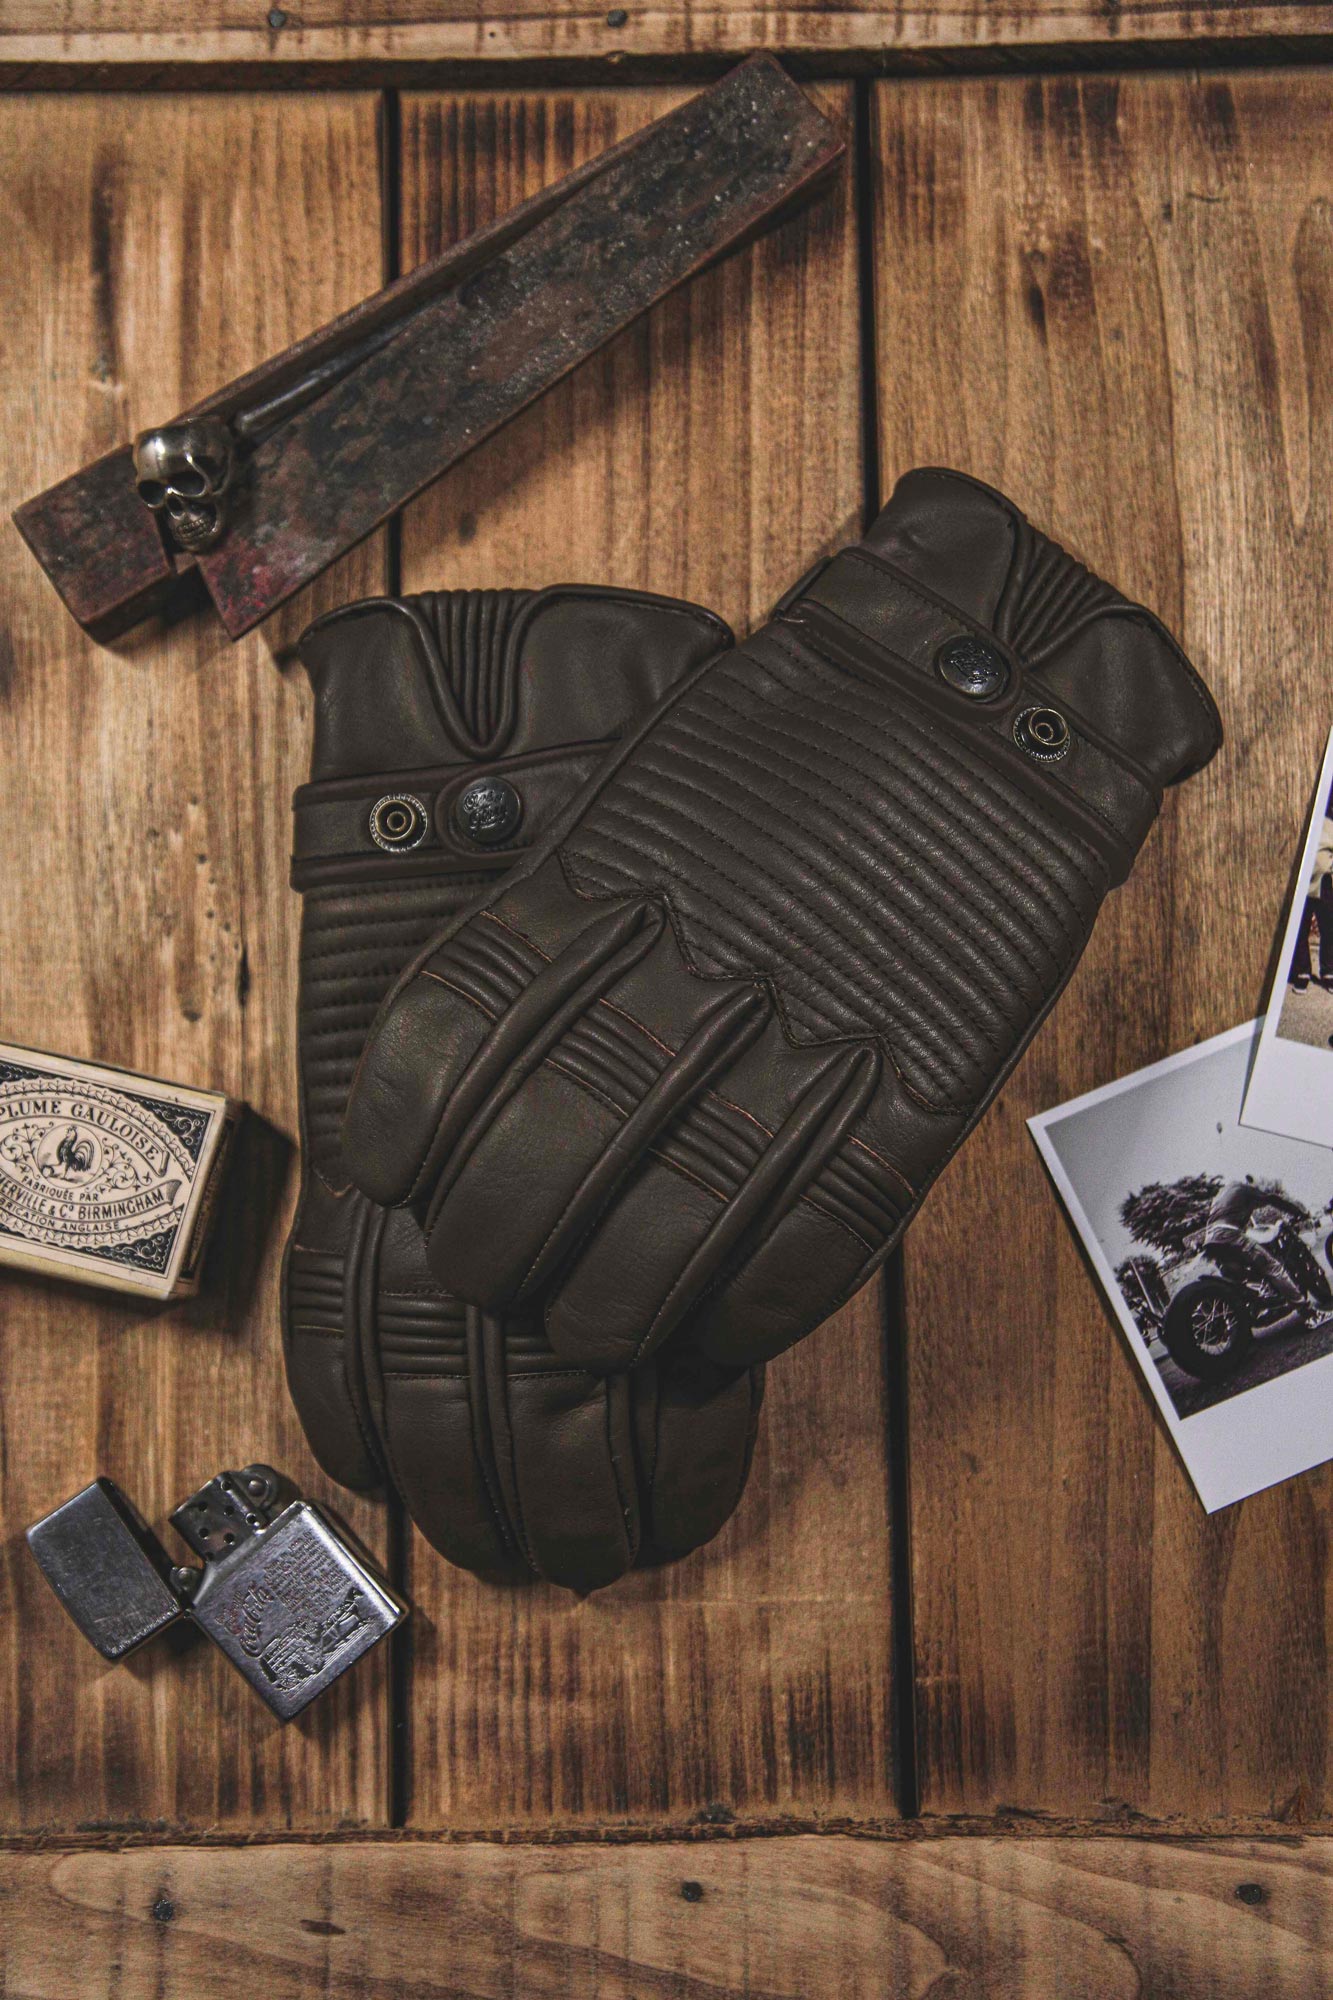 Age of Glory Garage Leather CE Gloves - Brown